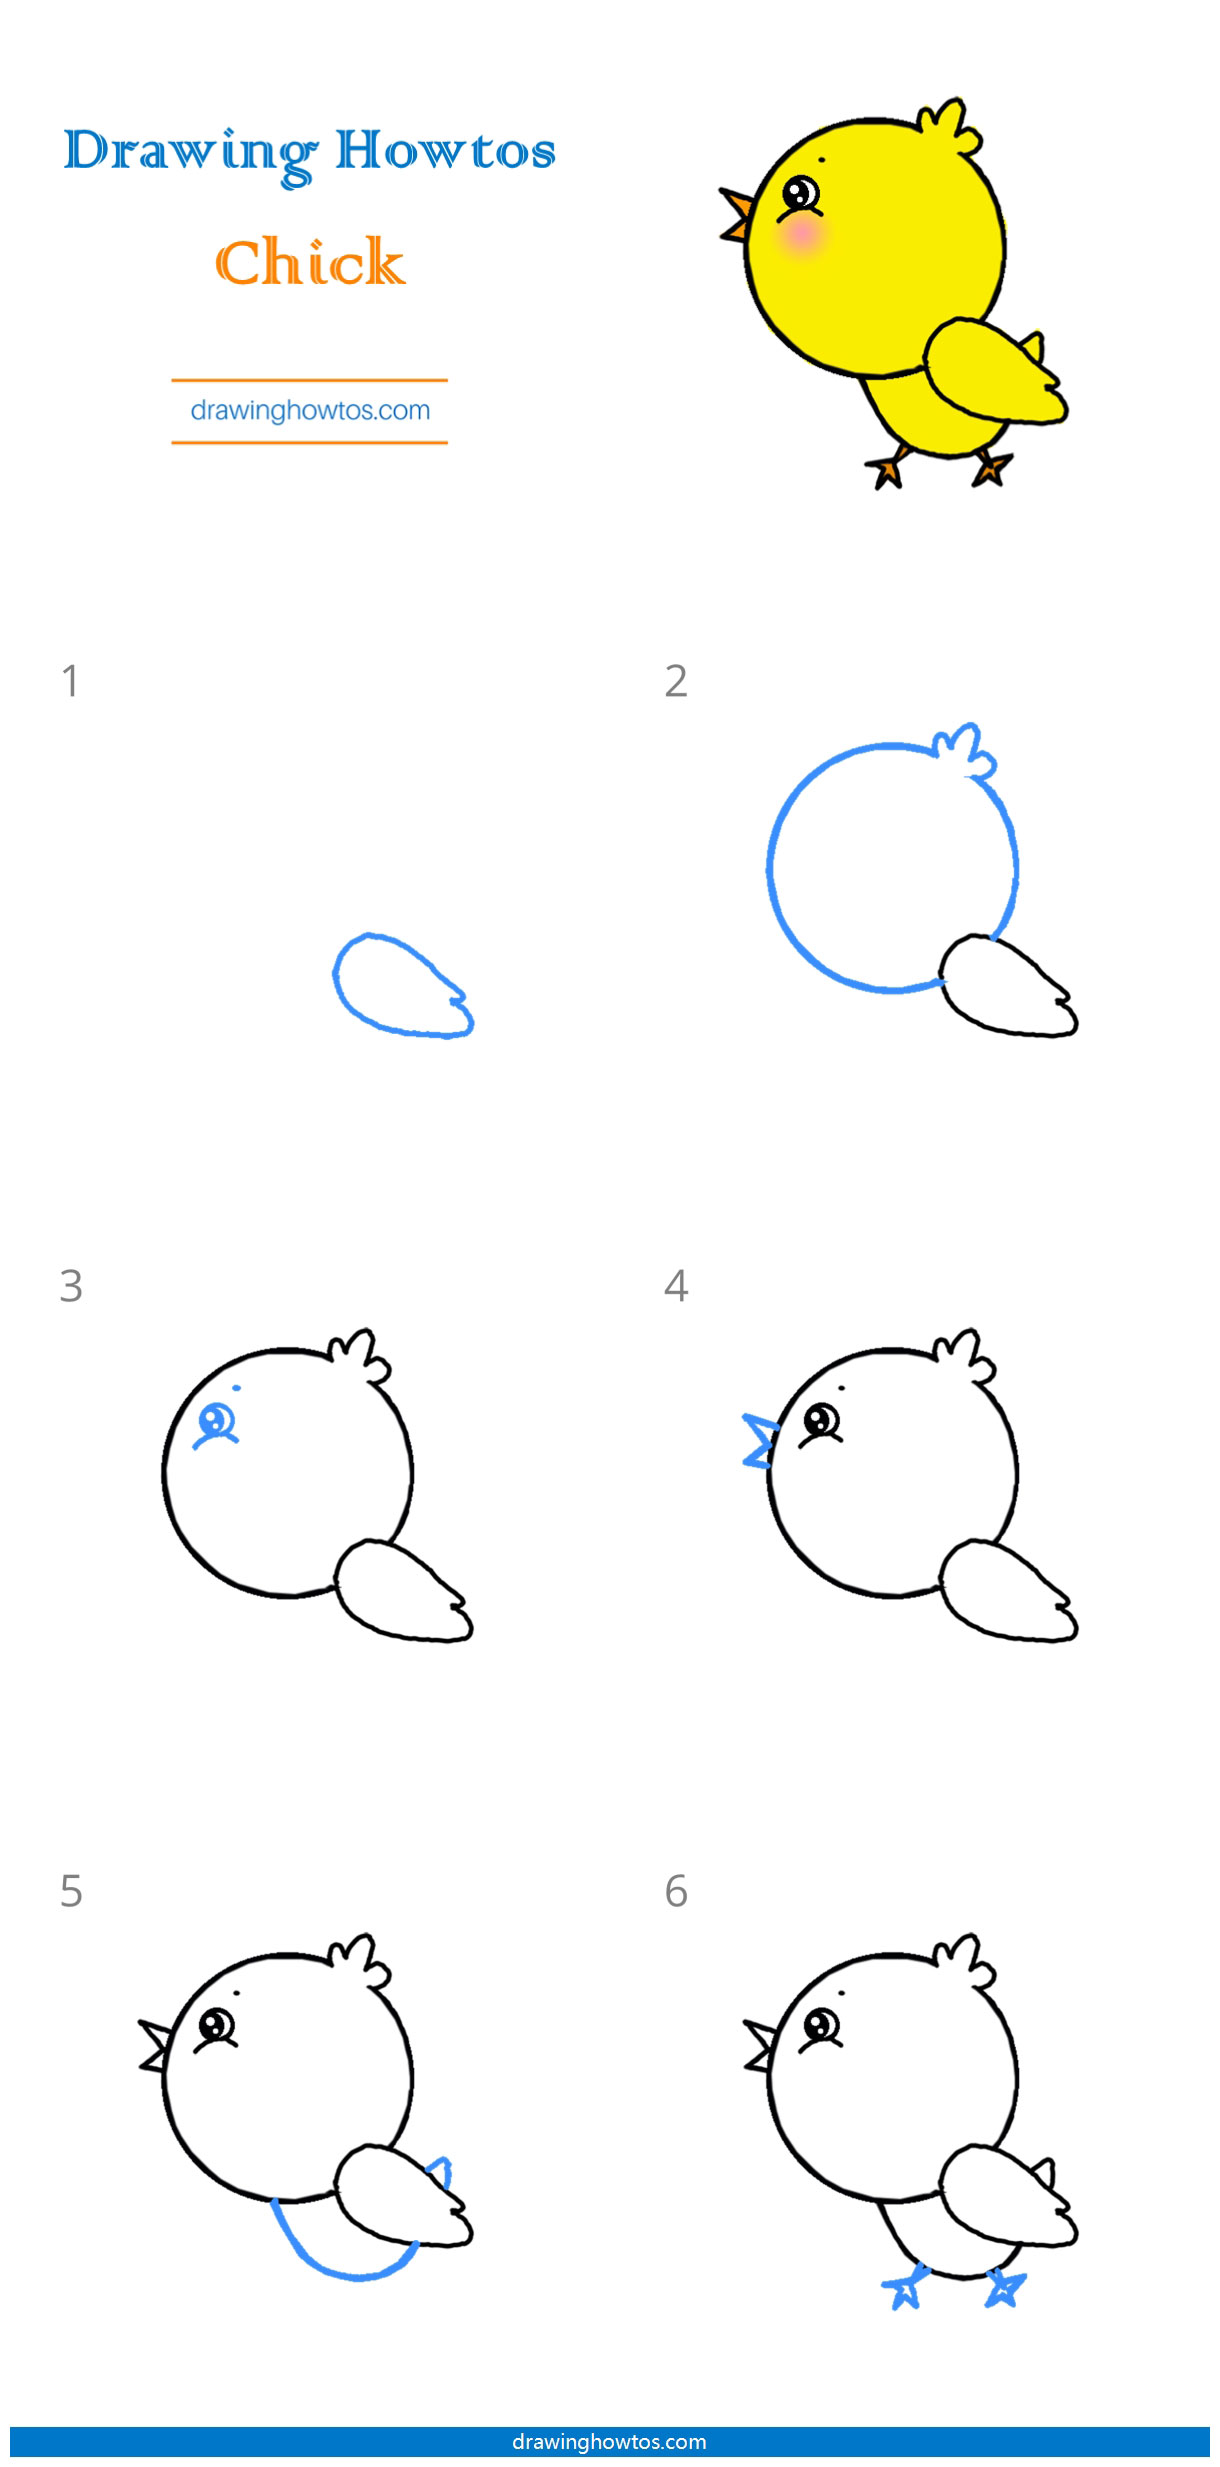 How to Draw a Chick Step by Step